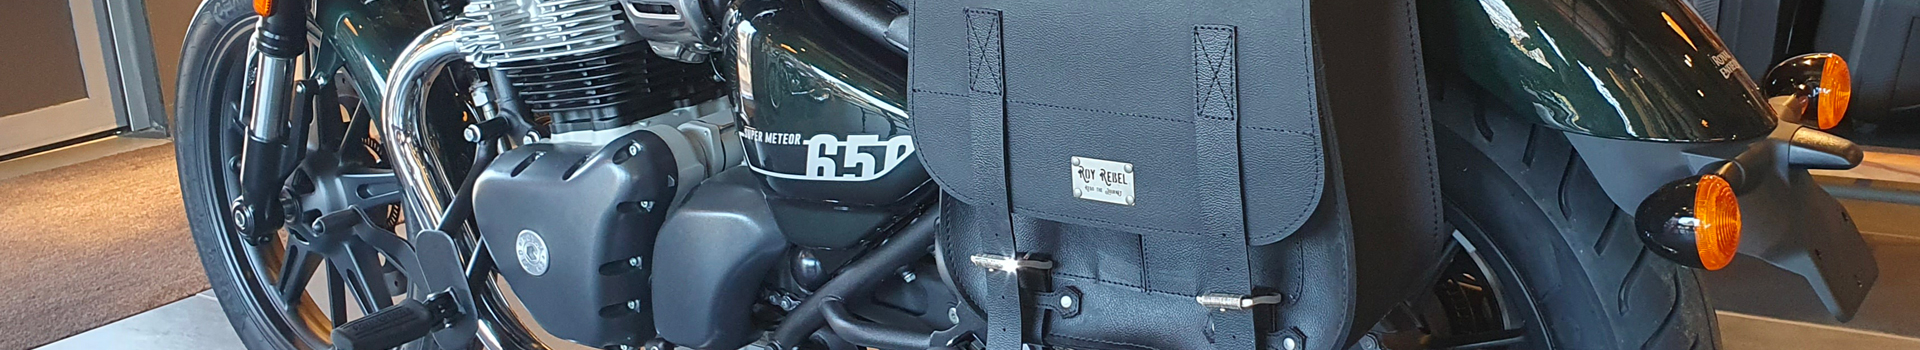 Roy Rebel bags and accessories for you and your Royal Enfield